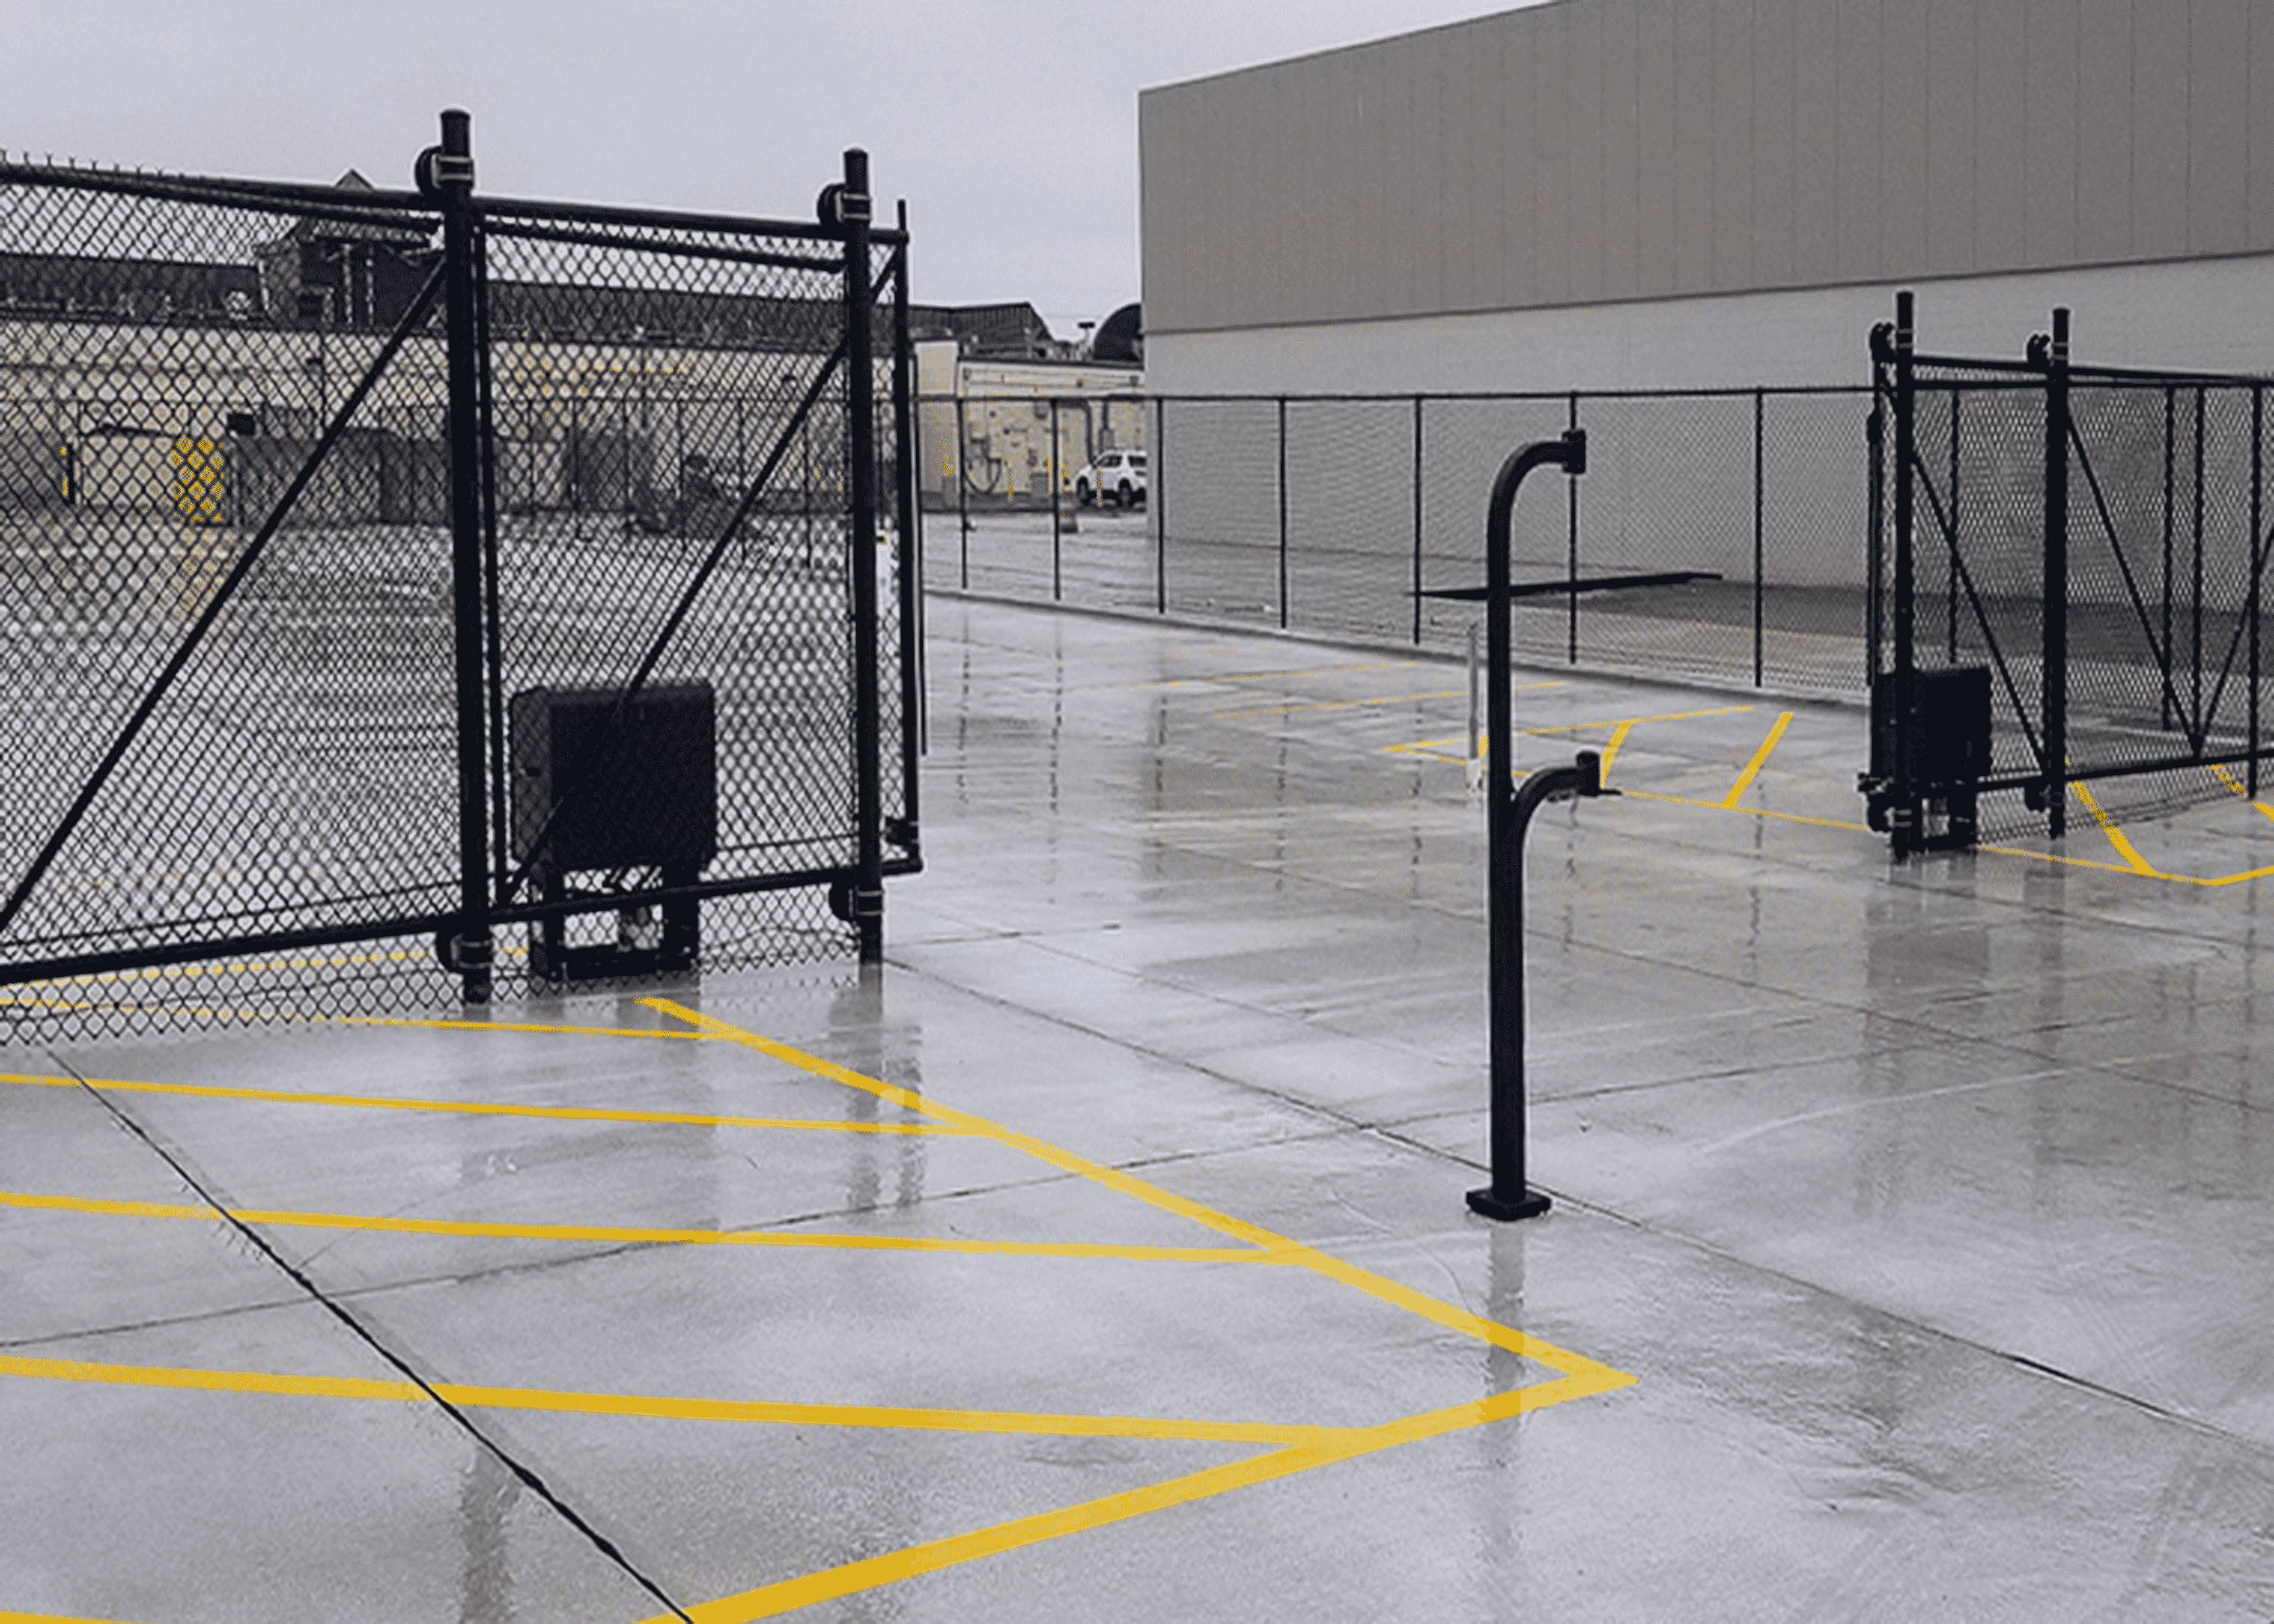 Commercial gate and access control system (electric gate operator) at Van der Graaf